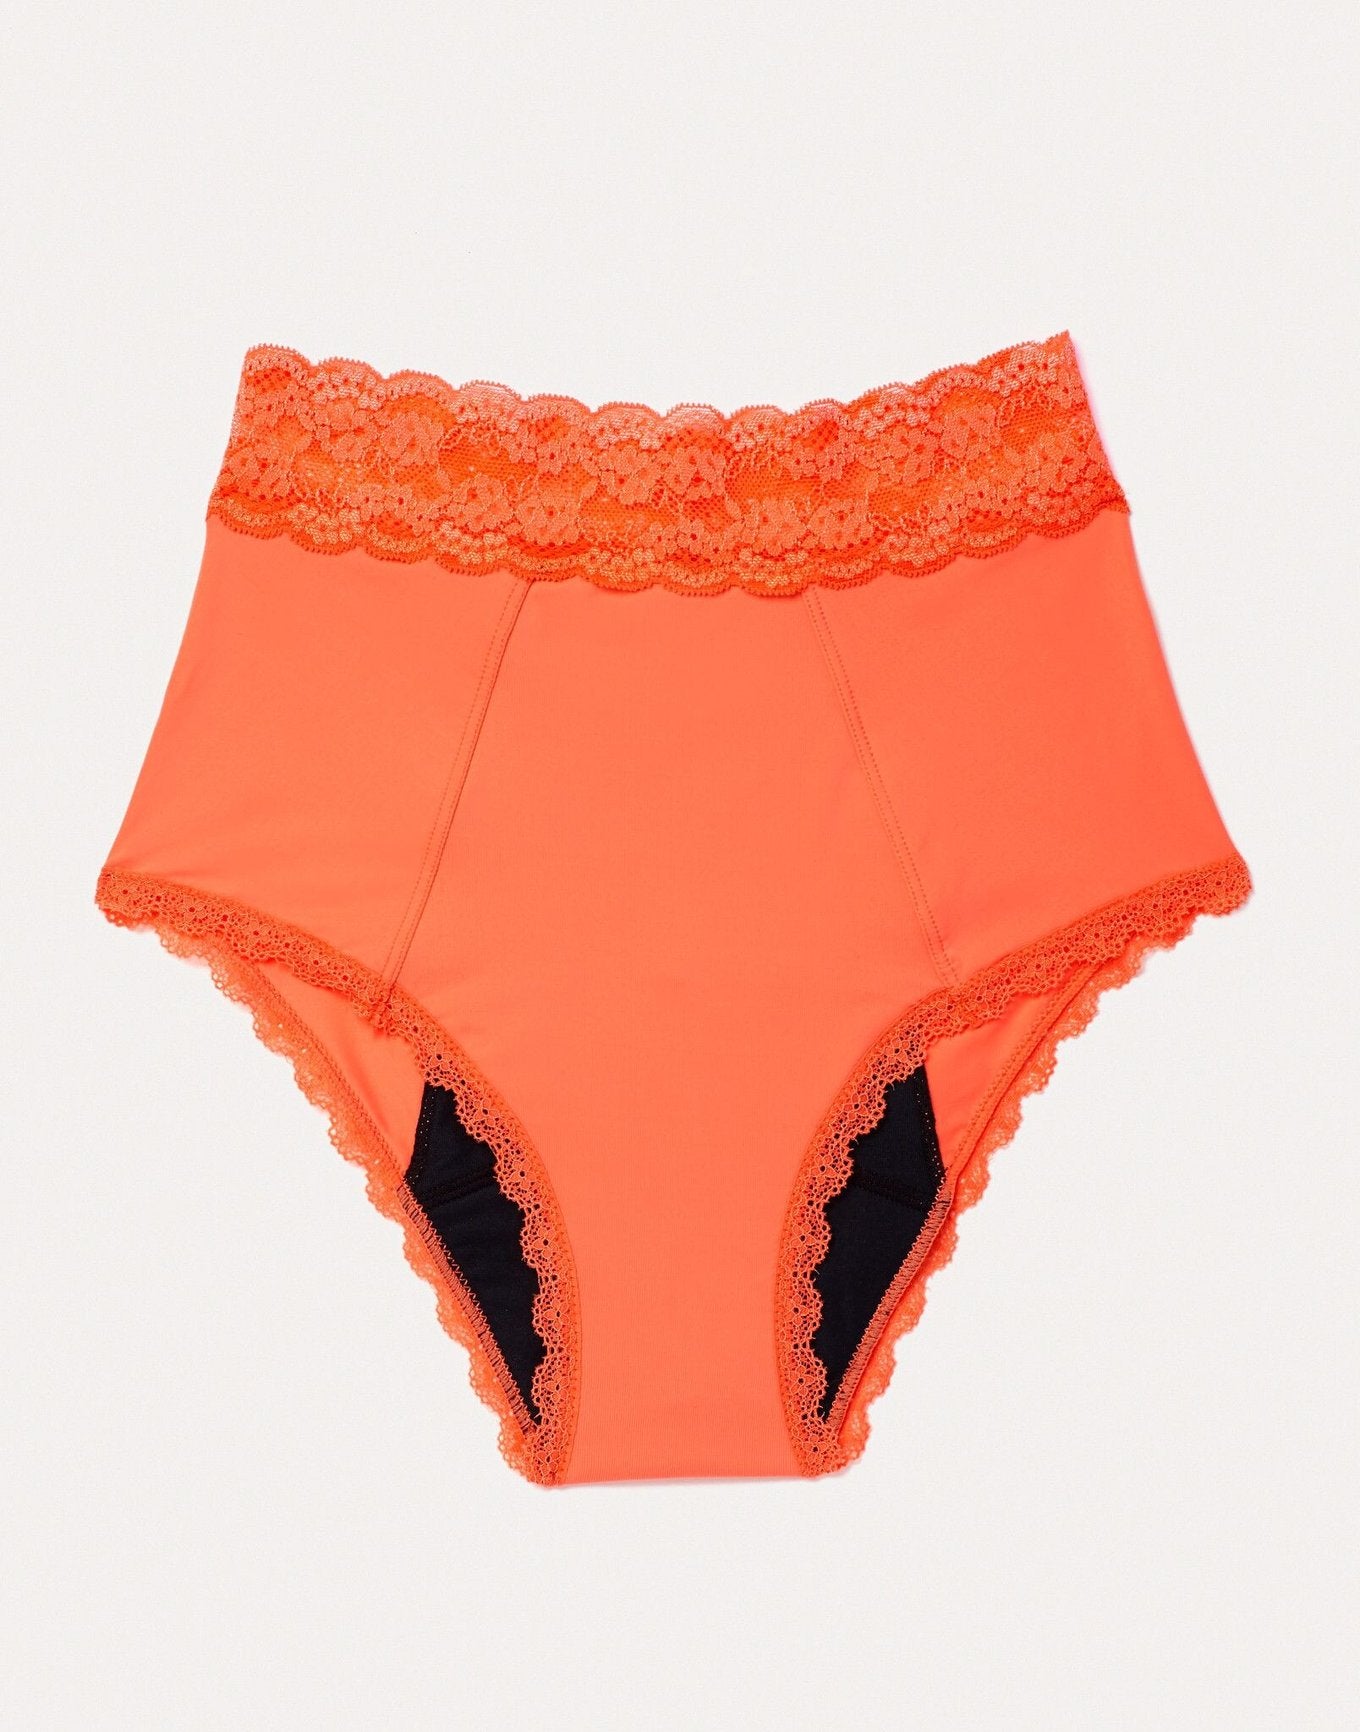 Joyja Amelia period-proof panty in color Living Coral and shape high waisted